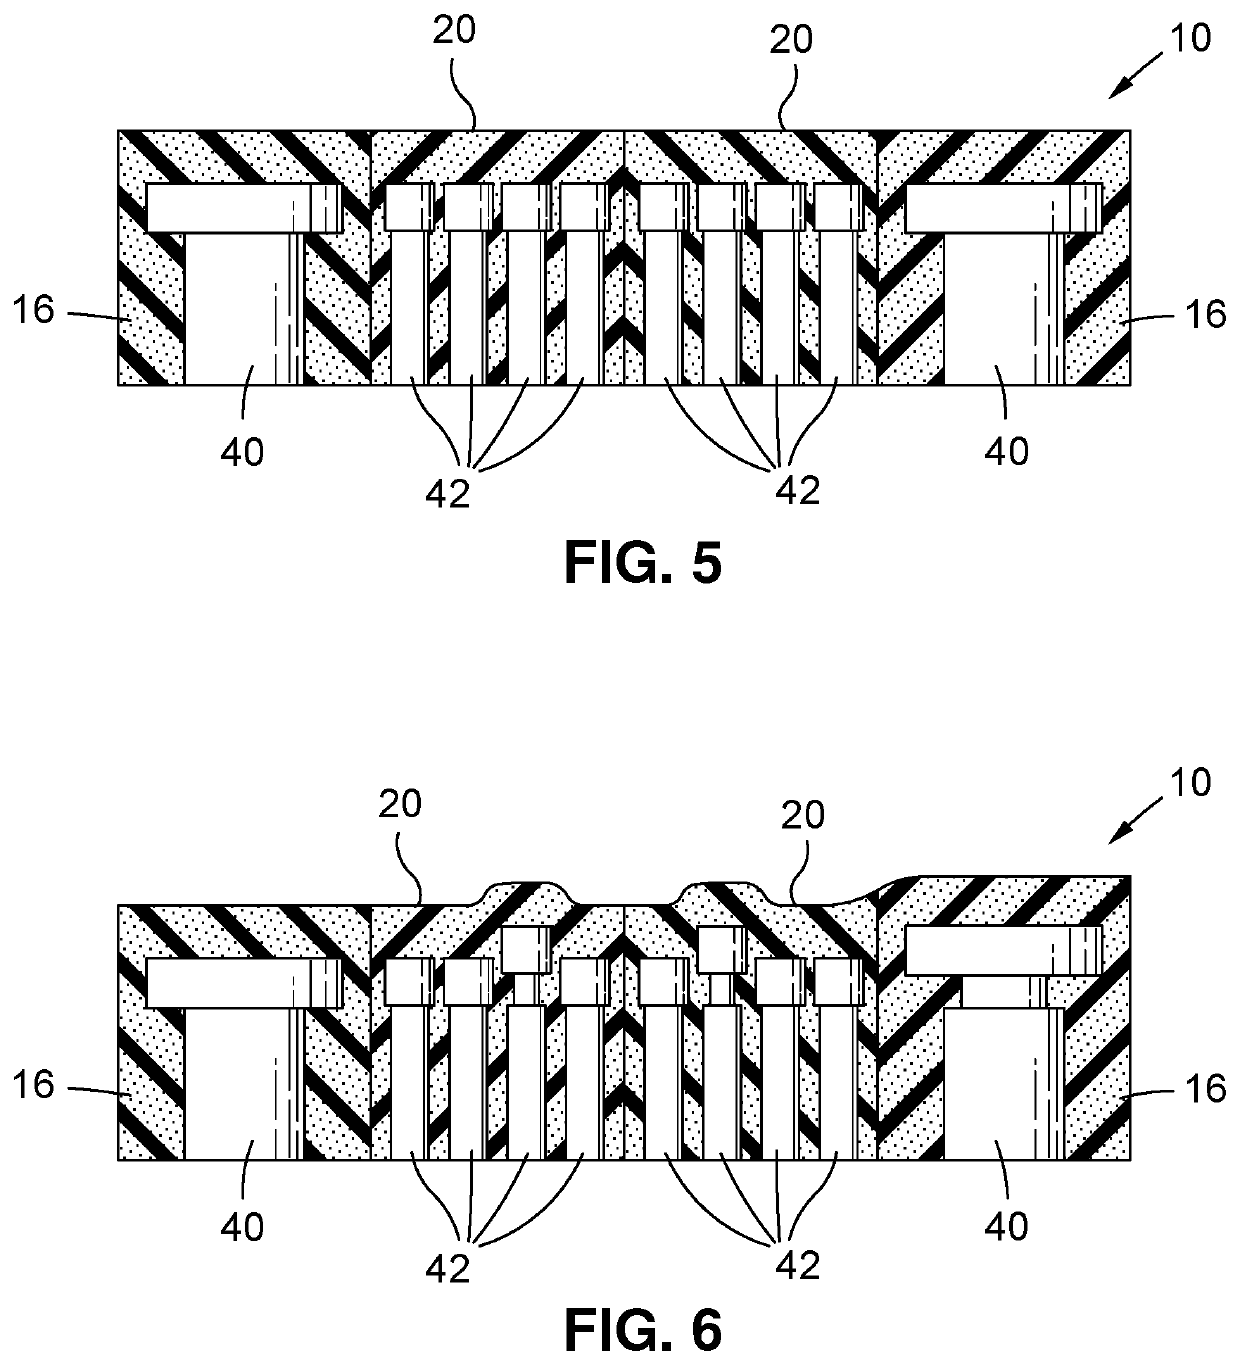 Modular mattress and bedframe system with surface positioning actuators